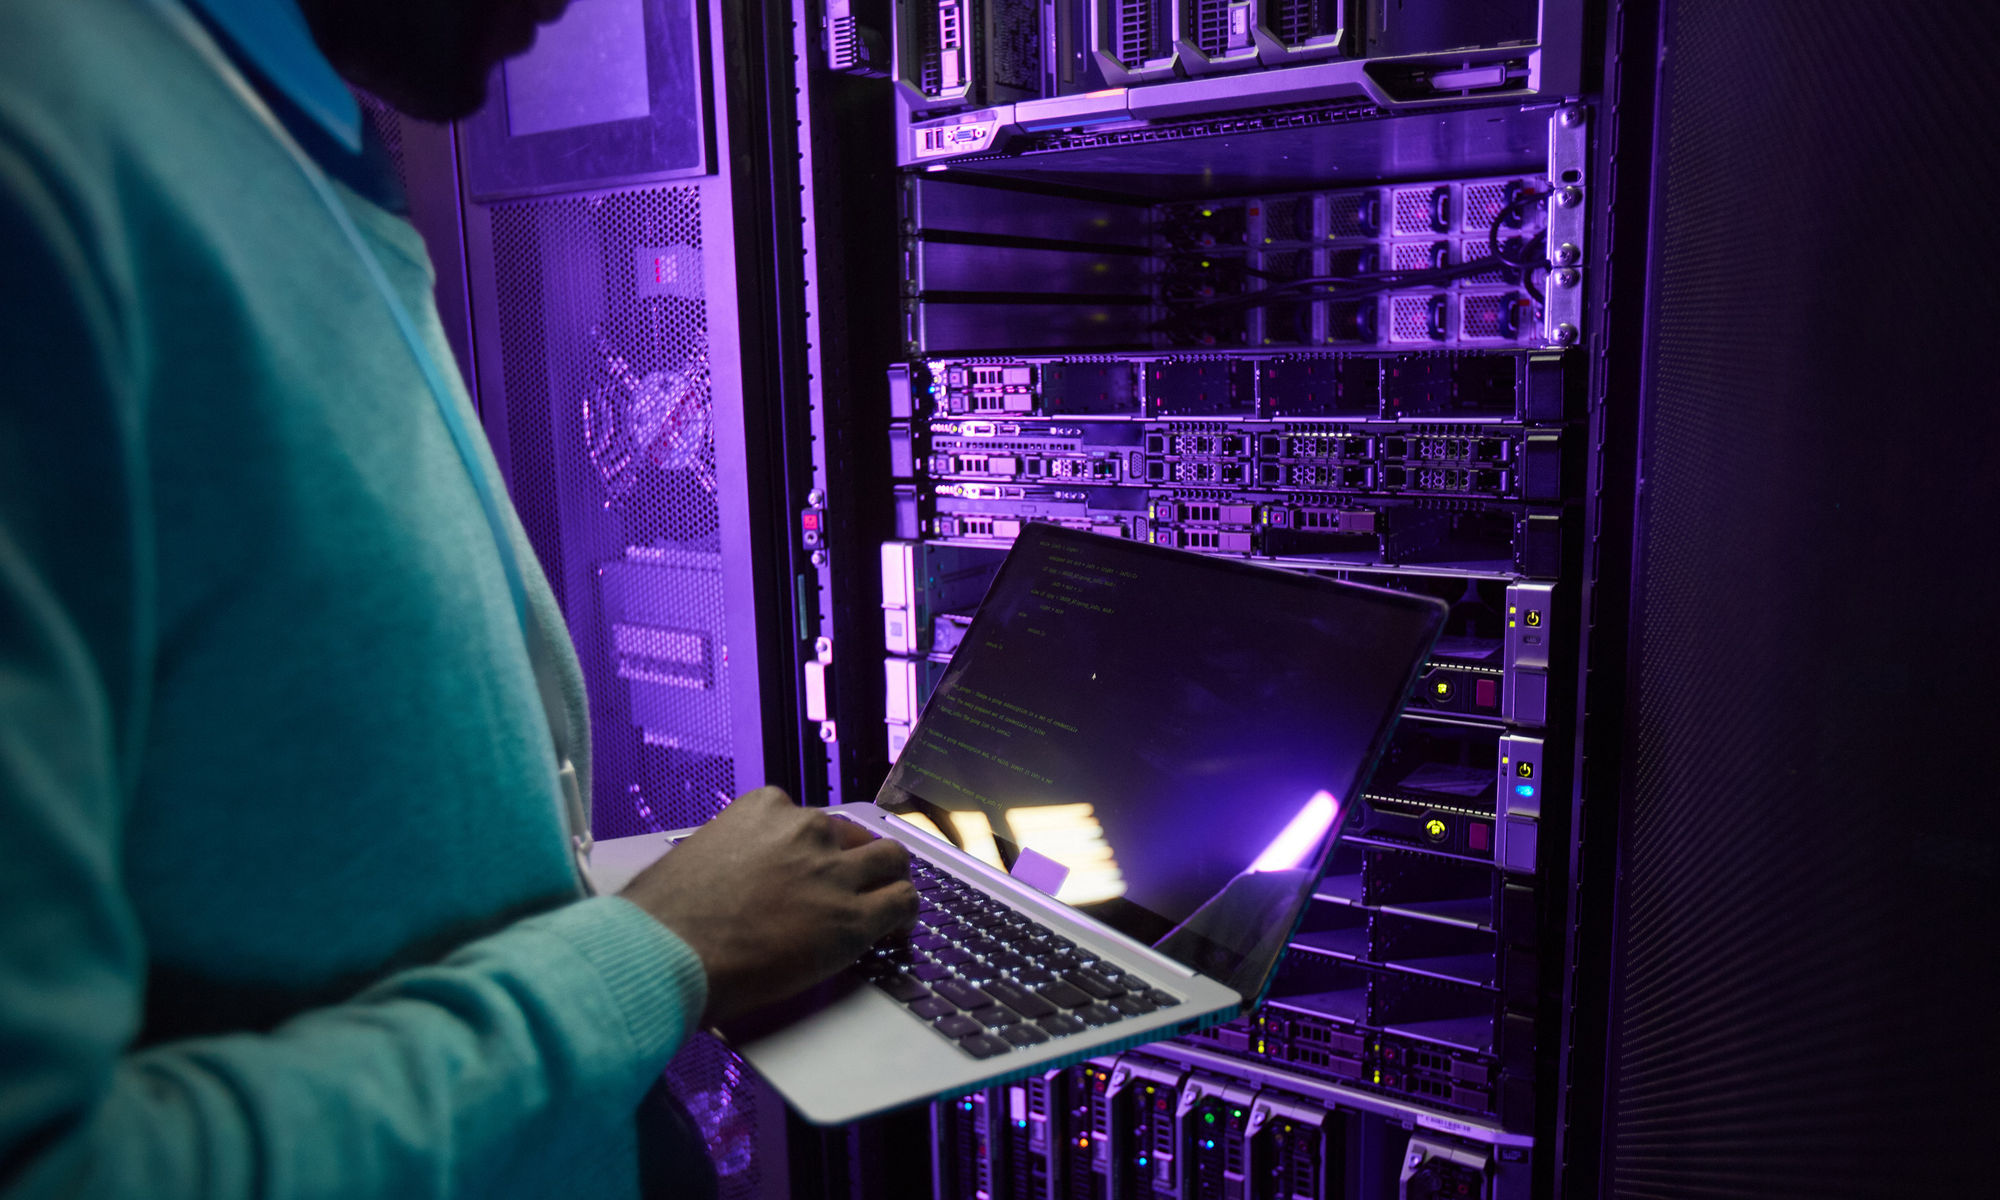 Cropped shot of African American data engineer holding laptop while working with supercomputer in server room lit by blue light, copy space